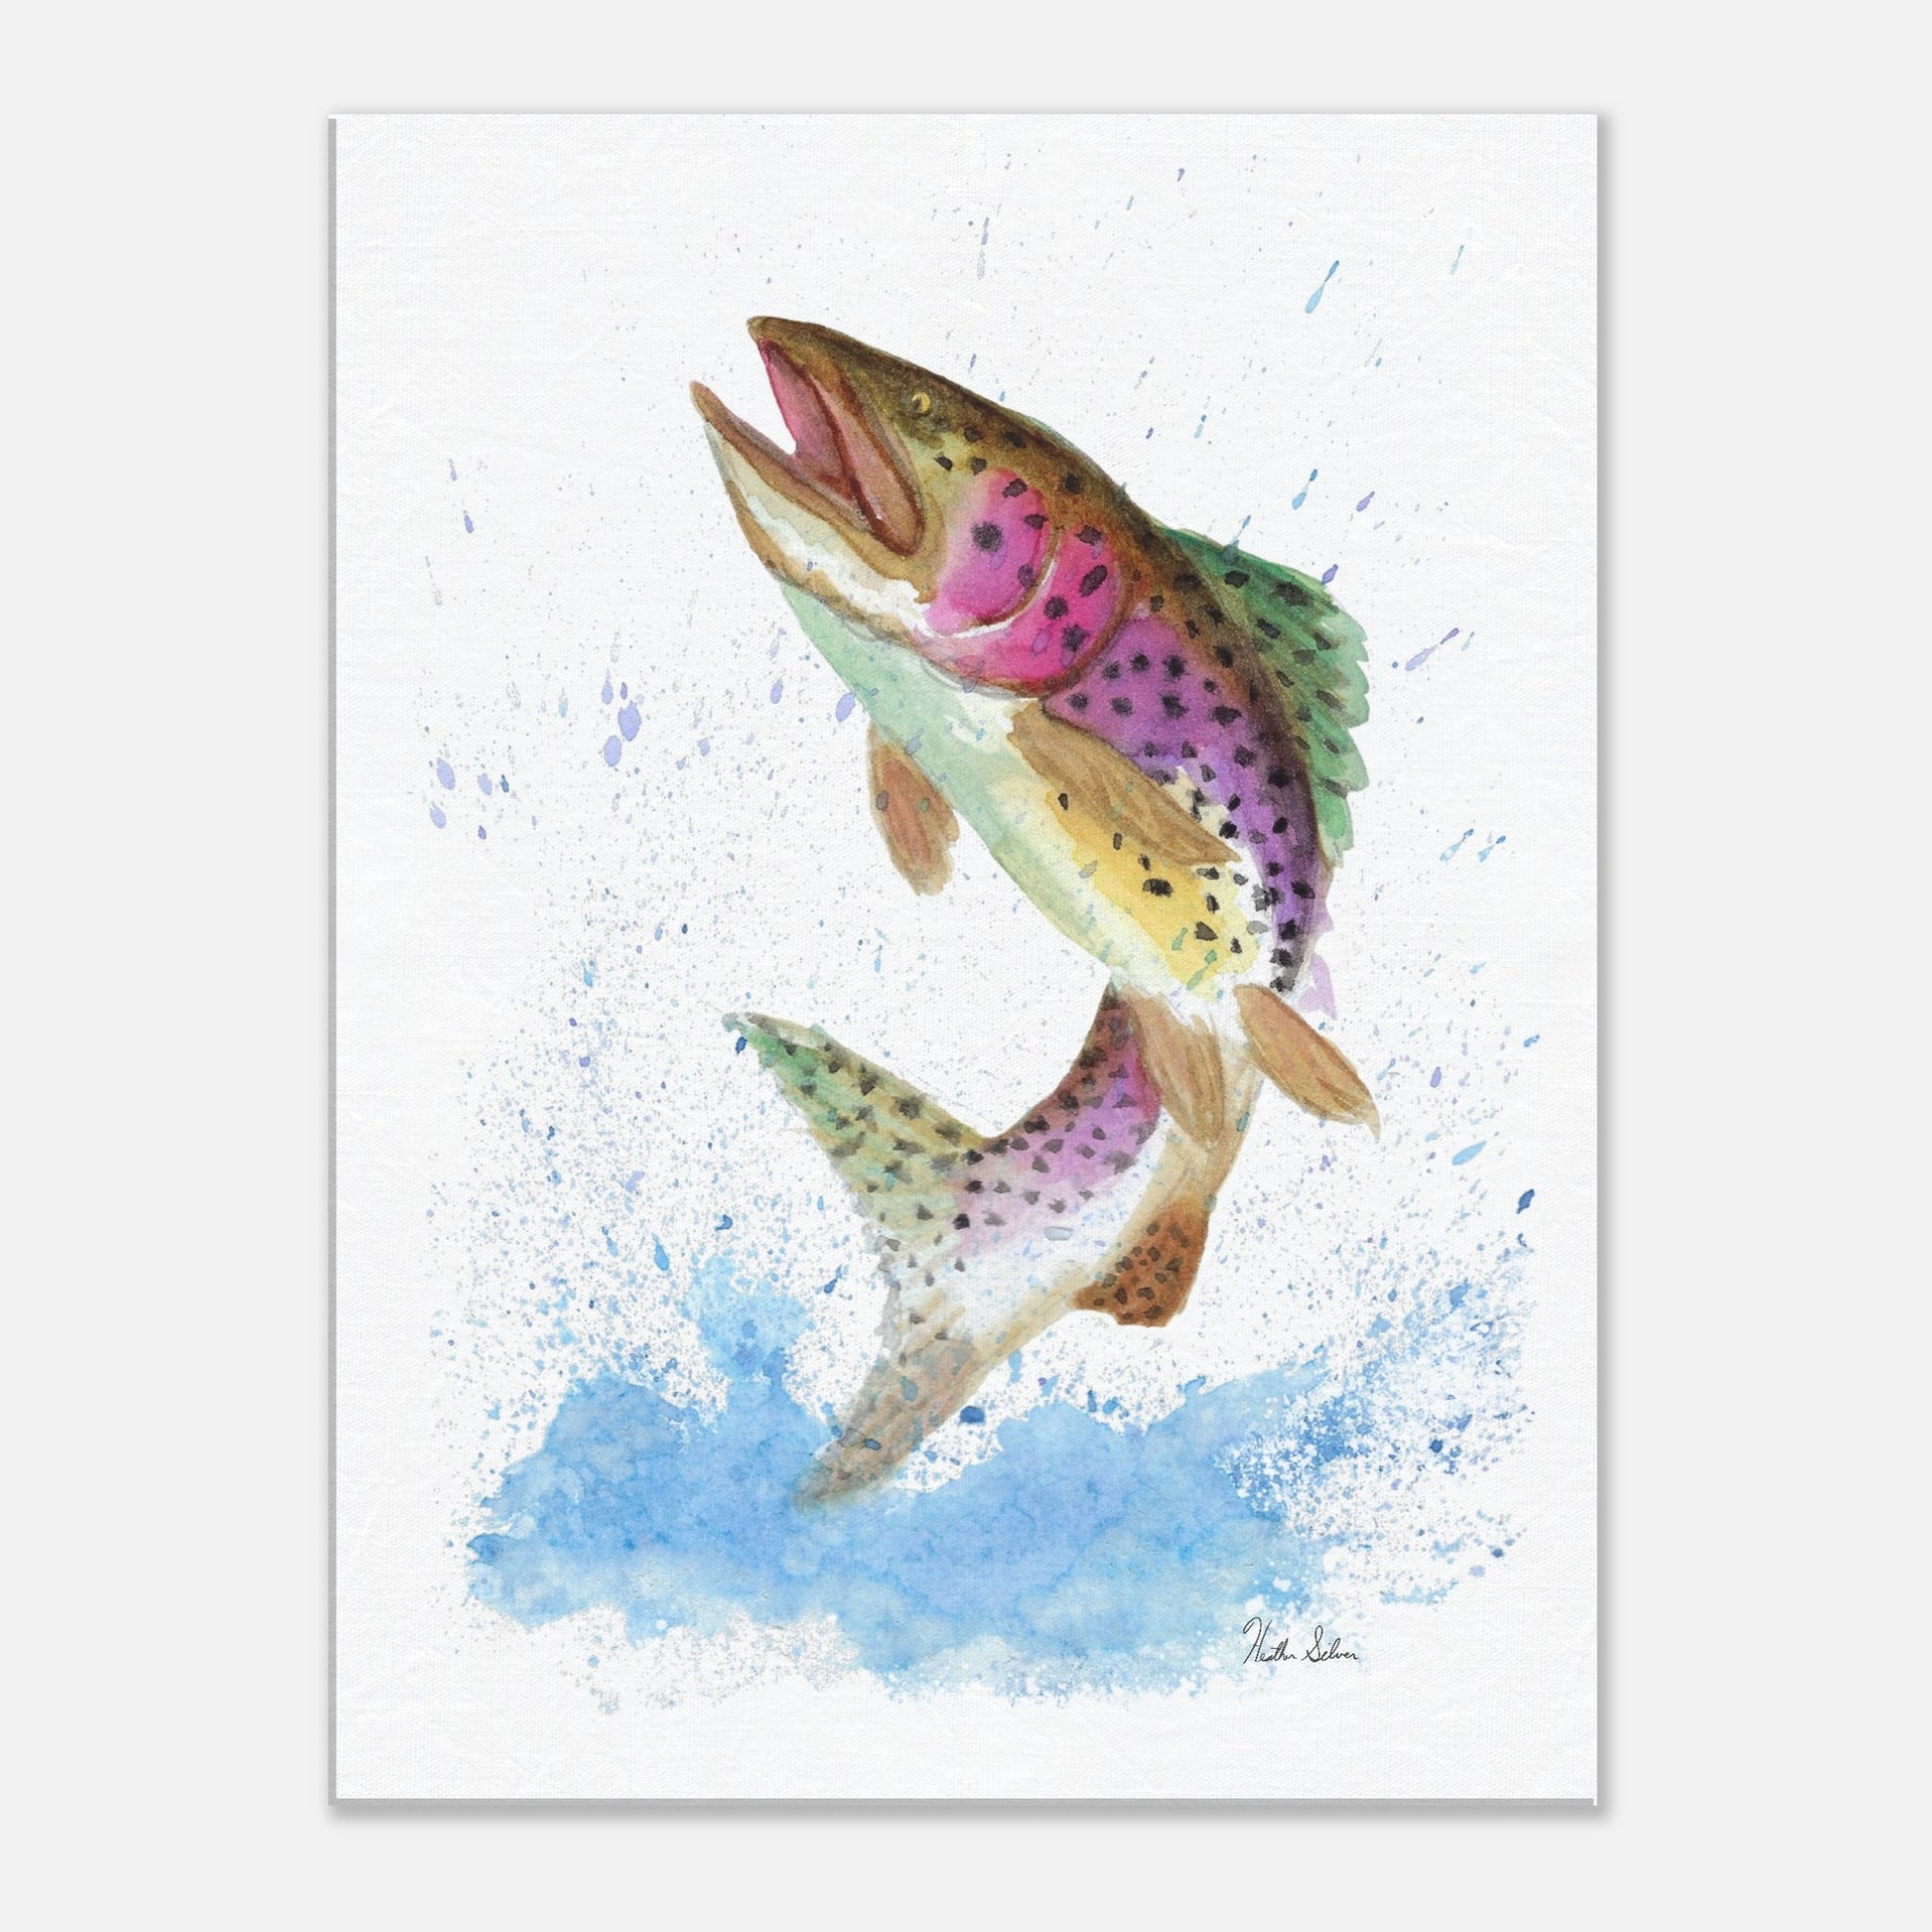 11 by 14 inch slim canvas wall art print featuring a watercolor painting of a rainbow trout leaping from the water. Hanging hardware included.